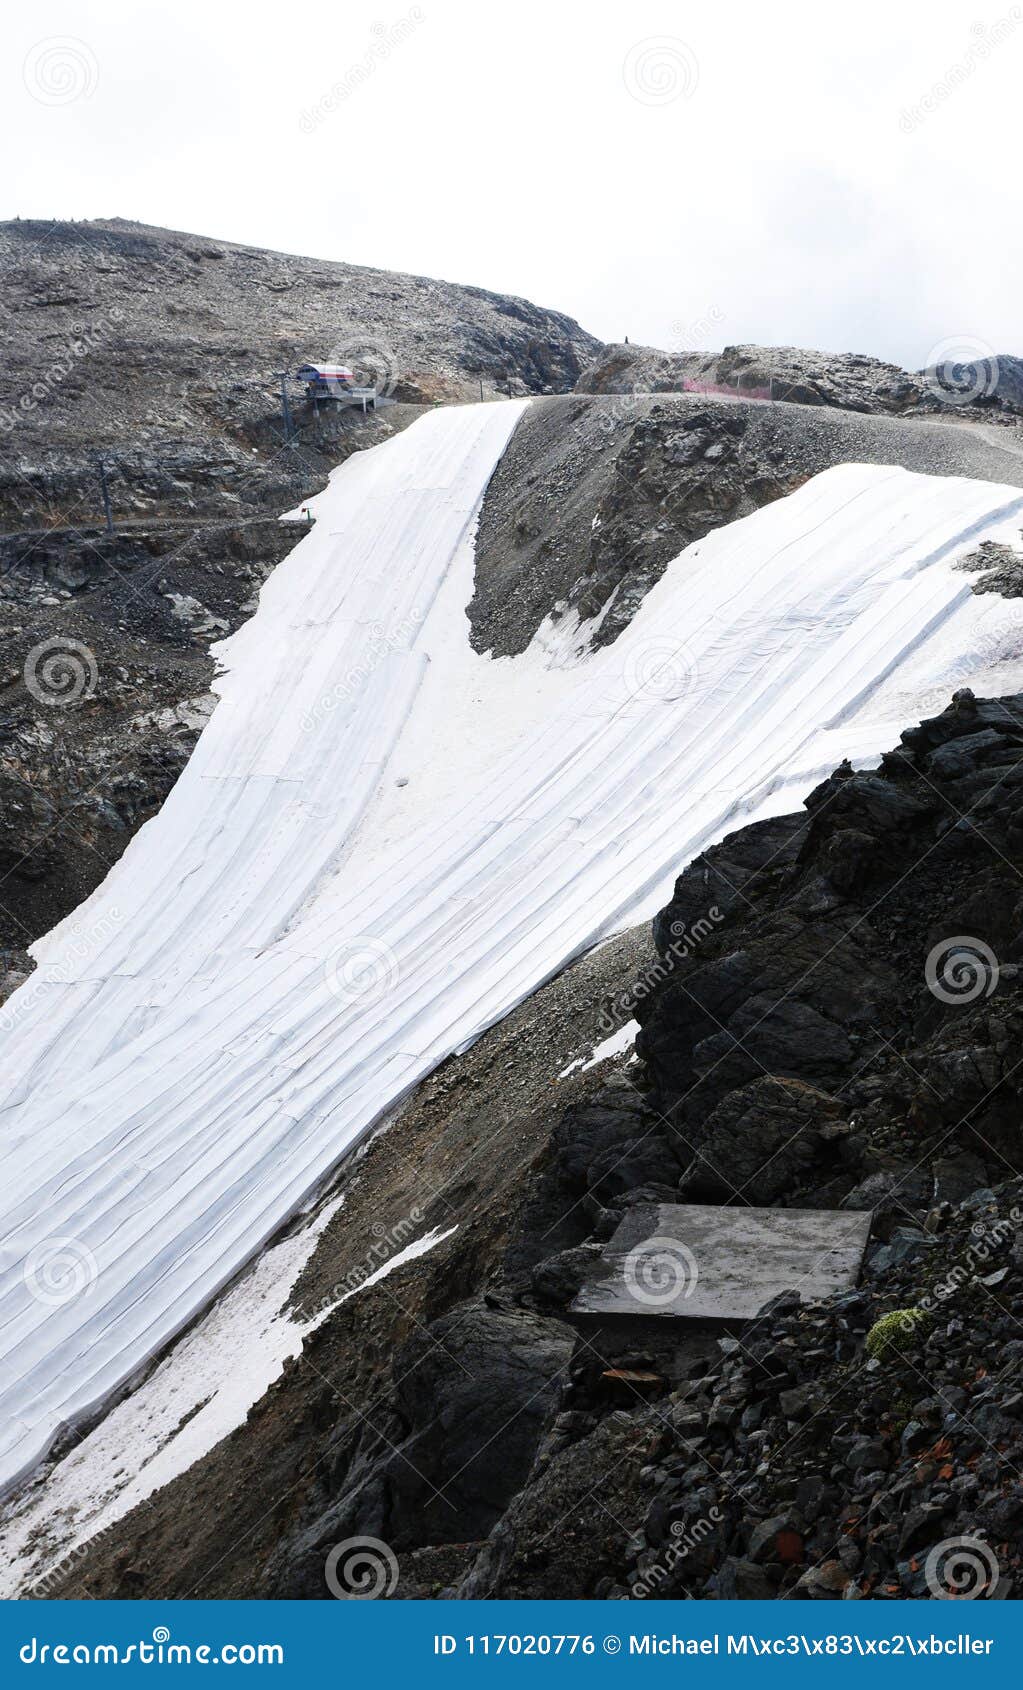 global clima change: the corvatsch-glacier near st. moritz cover